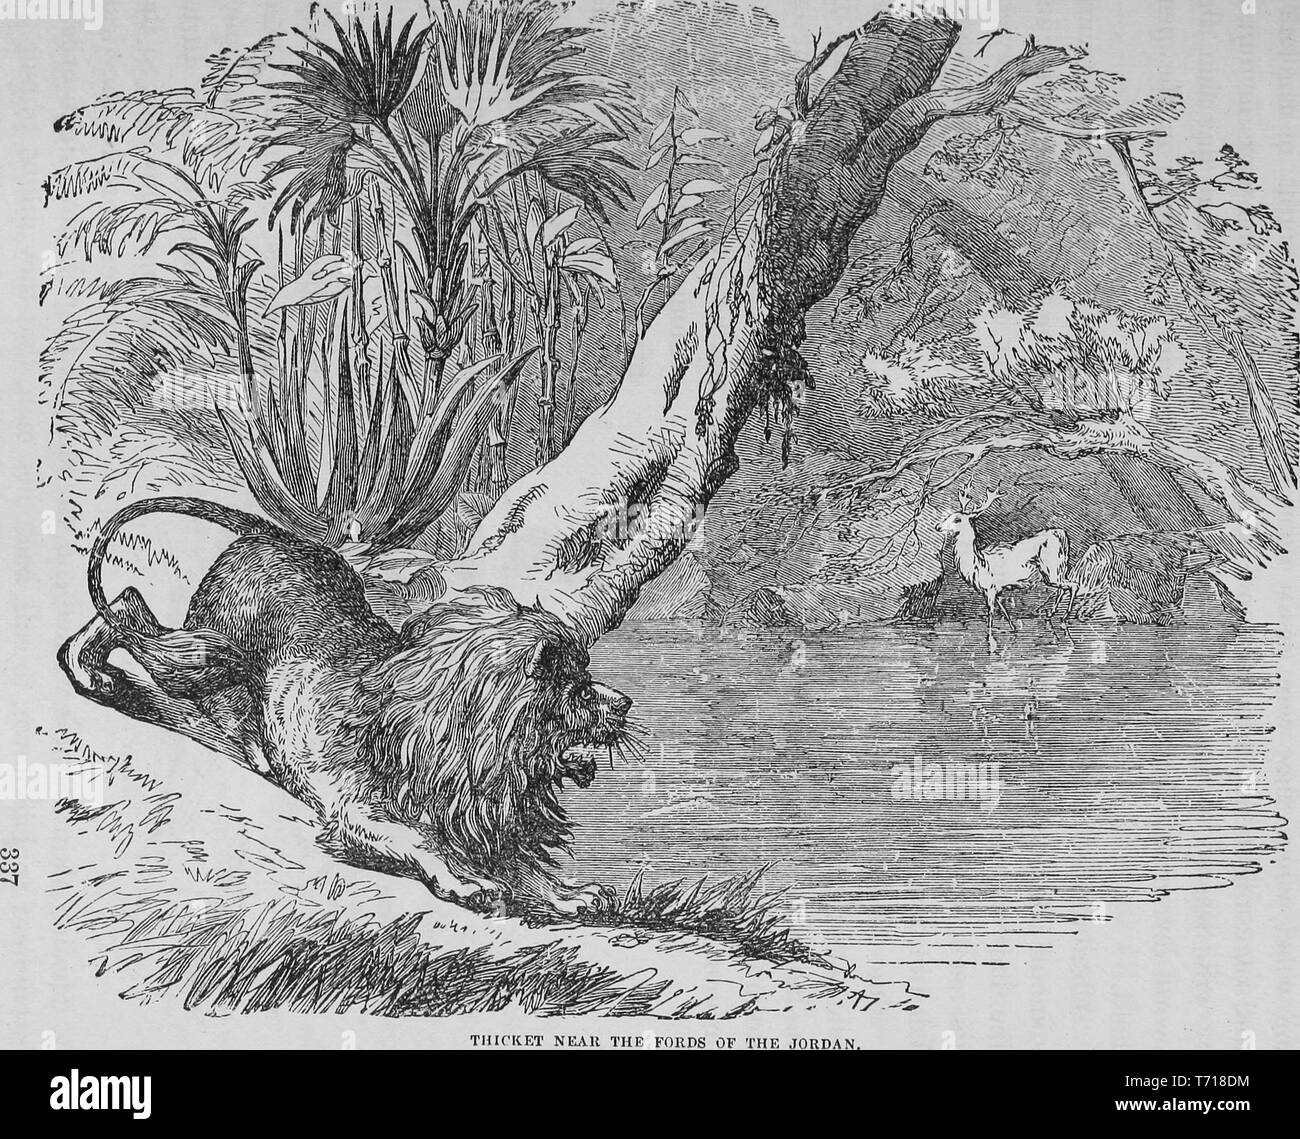 Engraving of a lion stalking a deer on the banks of the Jordan River, from the book 'The Pictorial Bible and commentator' by Ingram Cobbin, Daniel March, Linus Pierpont Brockett, and Hesba Stretton, 1878. Courtesy Internet Archive. () Stock Photo